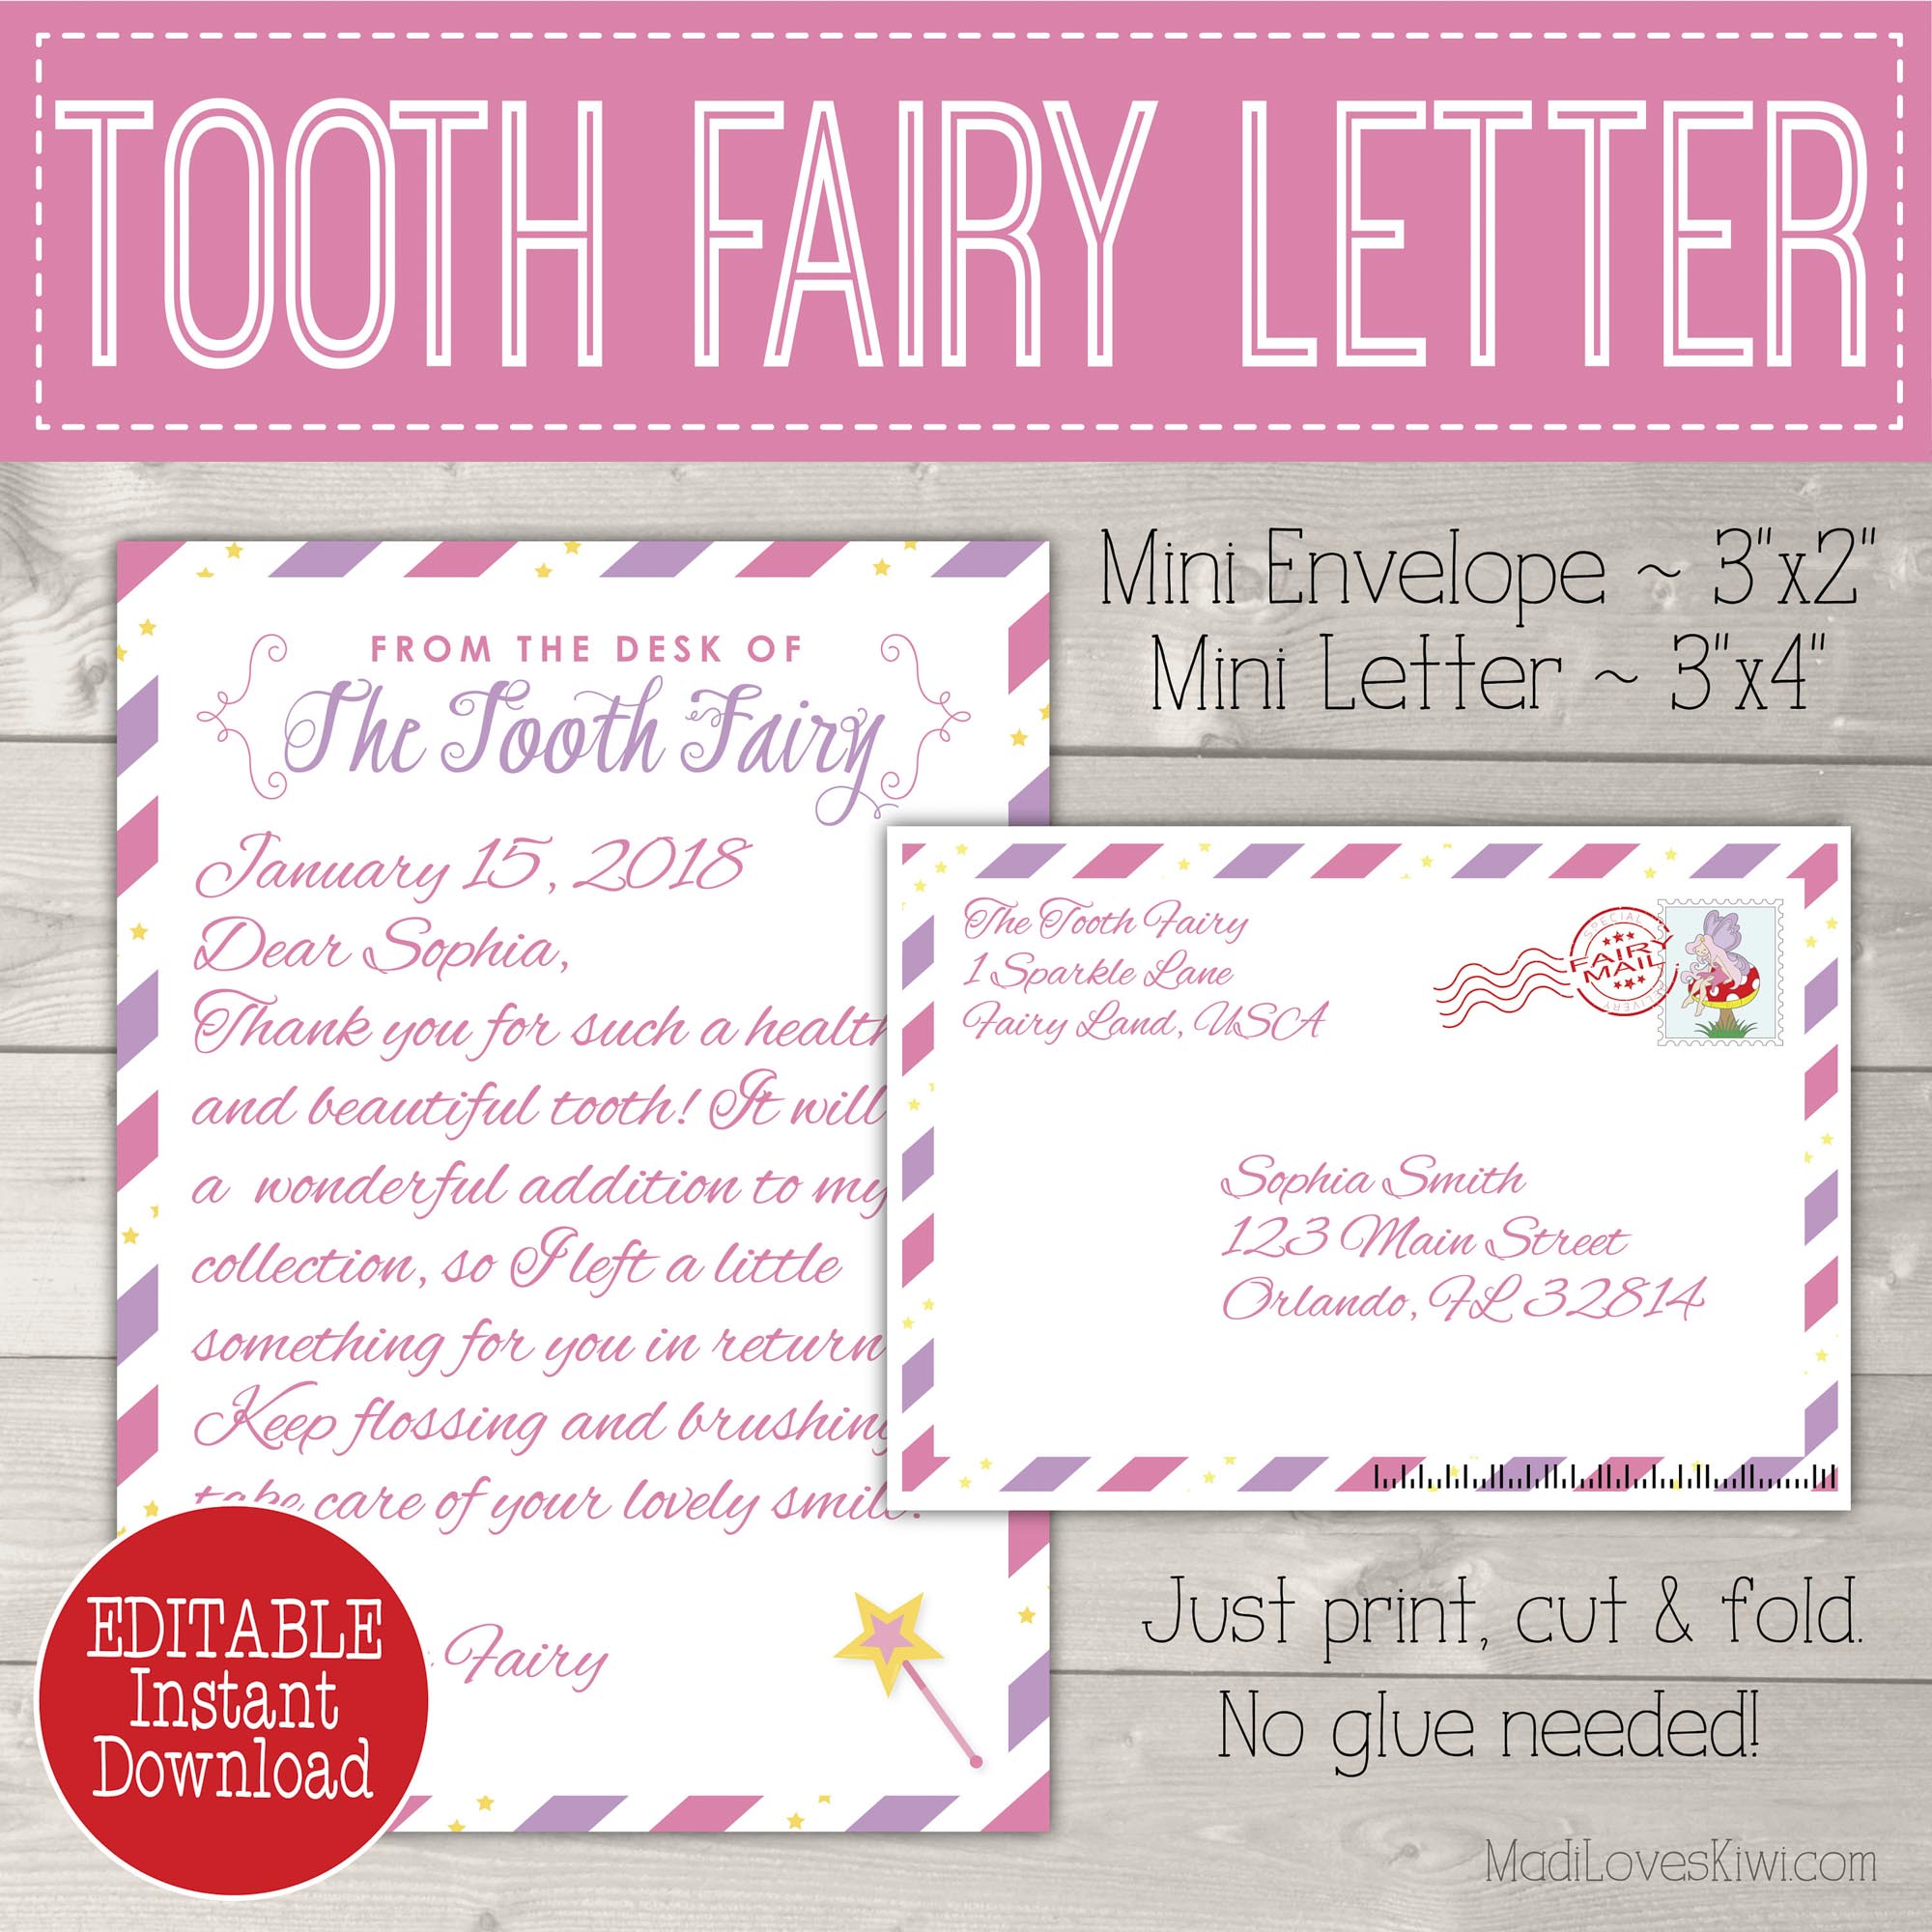 Free Printable Tooth Fairy Letter Template Bopqeproduction